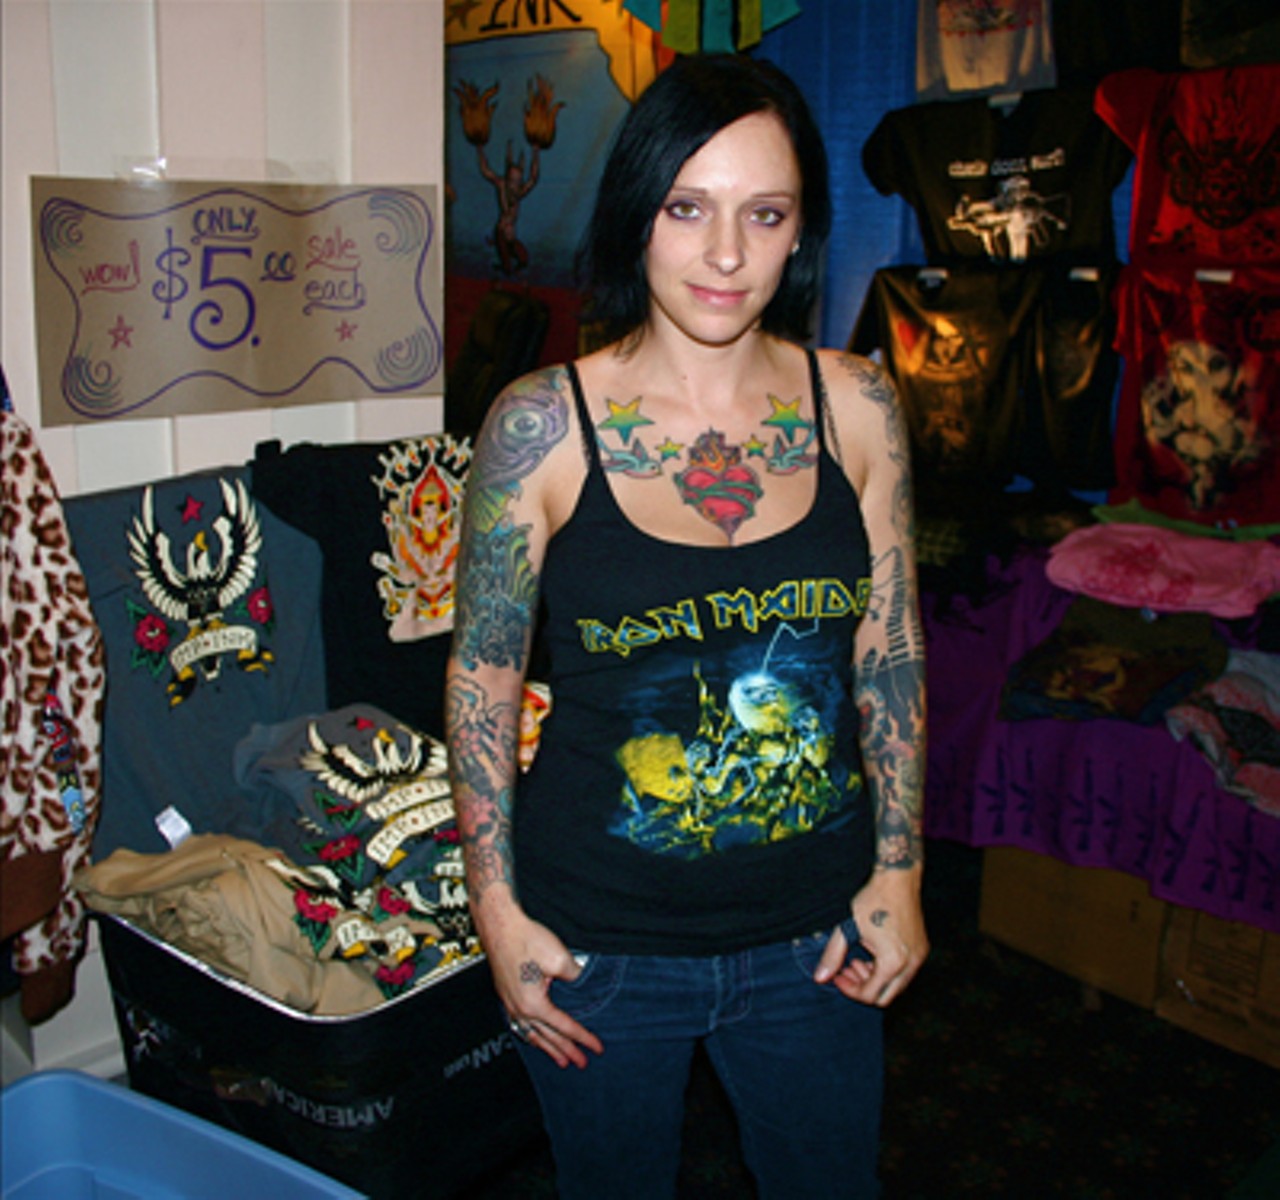 Old School Tattoo Expo in St. Louis